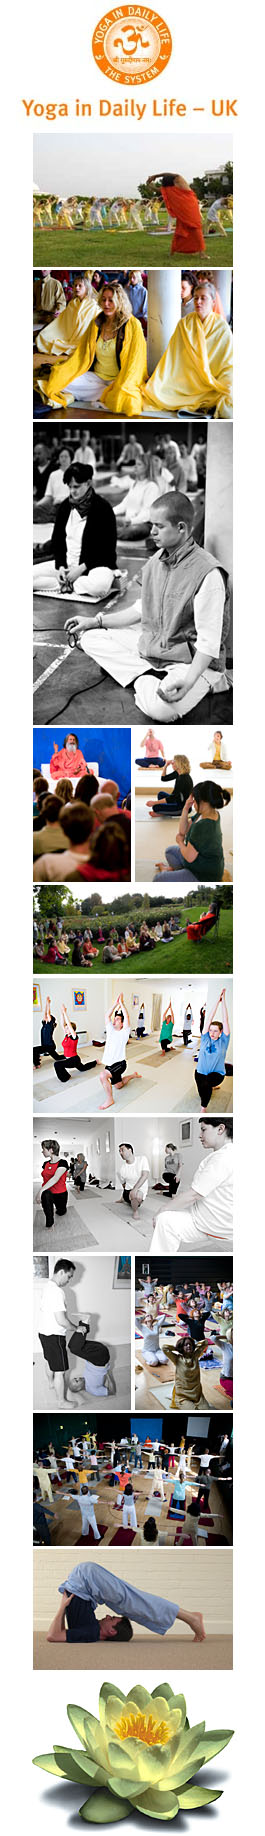 Profile picture for Yoga in Daily Life Association UK